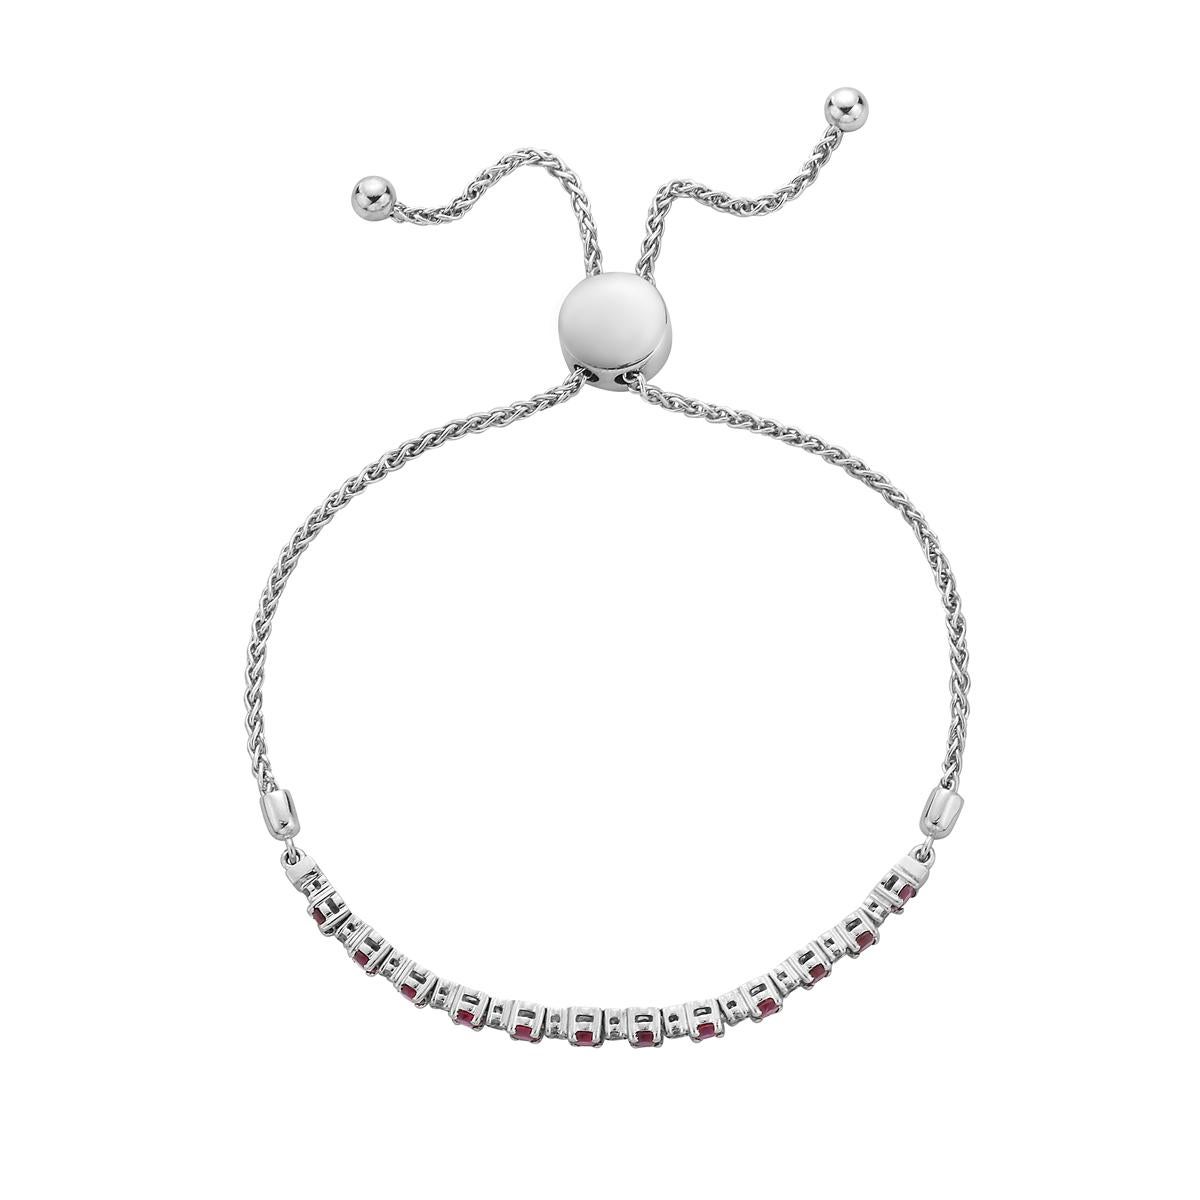 This fun and beautiful bracelet is gorgeous alone or stacked with others. This 14K bracelet has 12 Rubys totaling 0.9 carats. There are 12 round SI1-SI2, GH color diamonds totaling 0.15 carats. They are set in 9 grams of 14-karat white gold. This